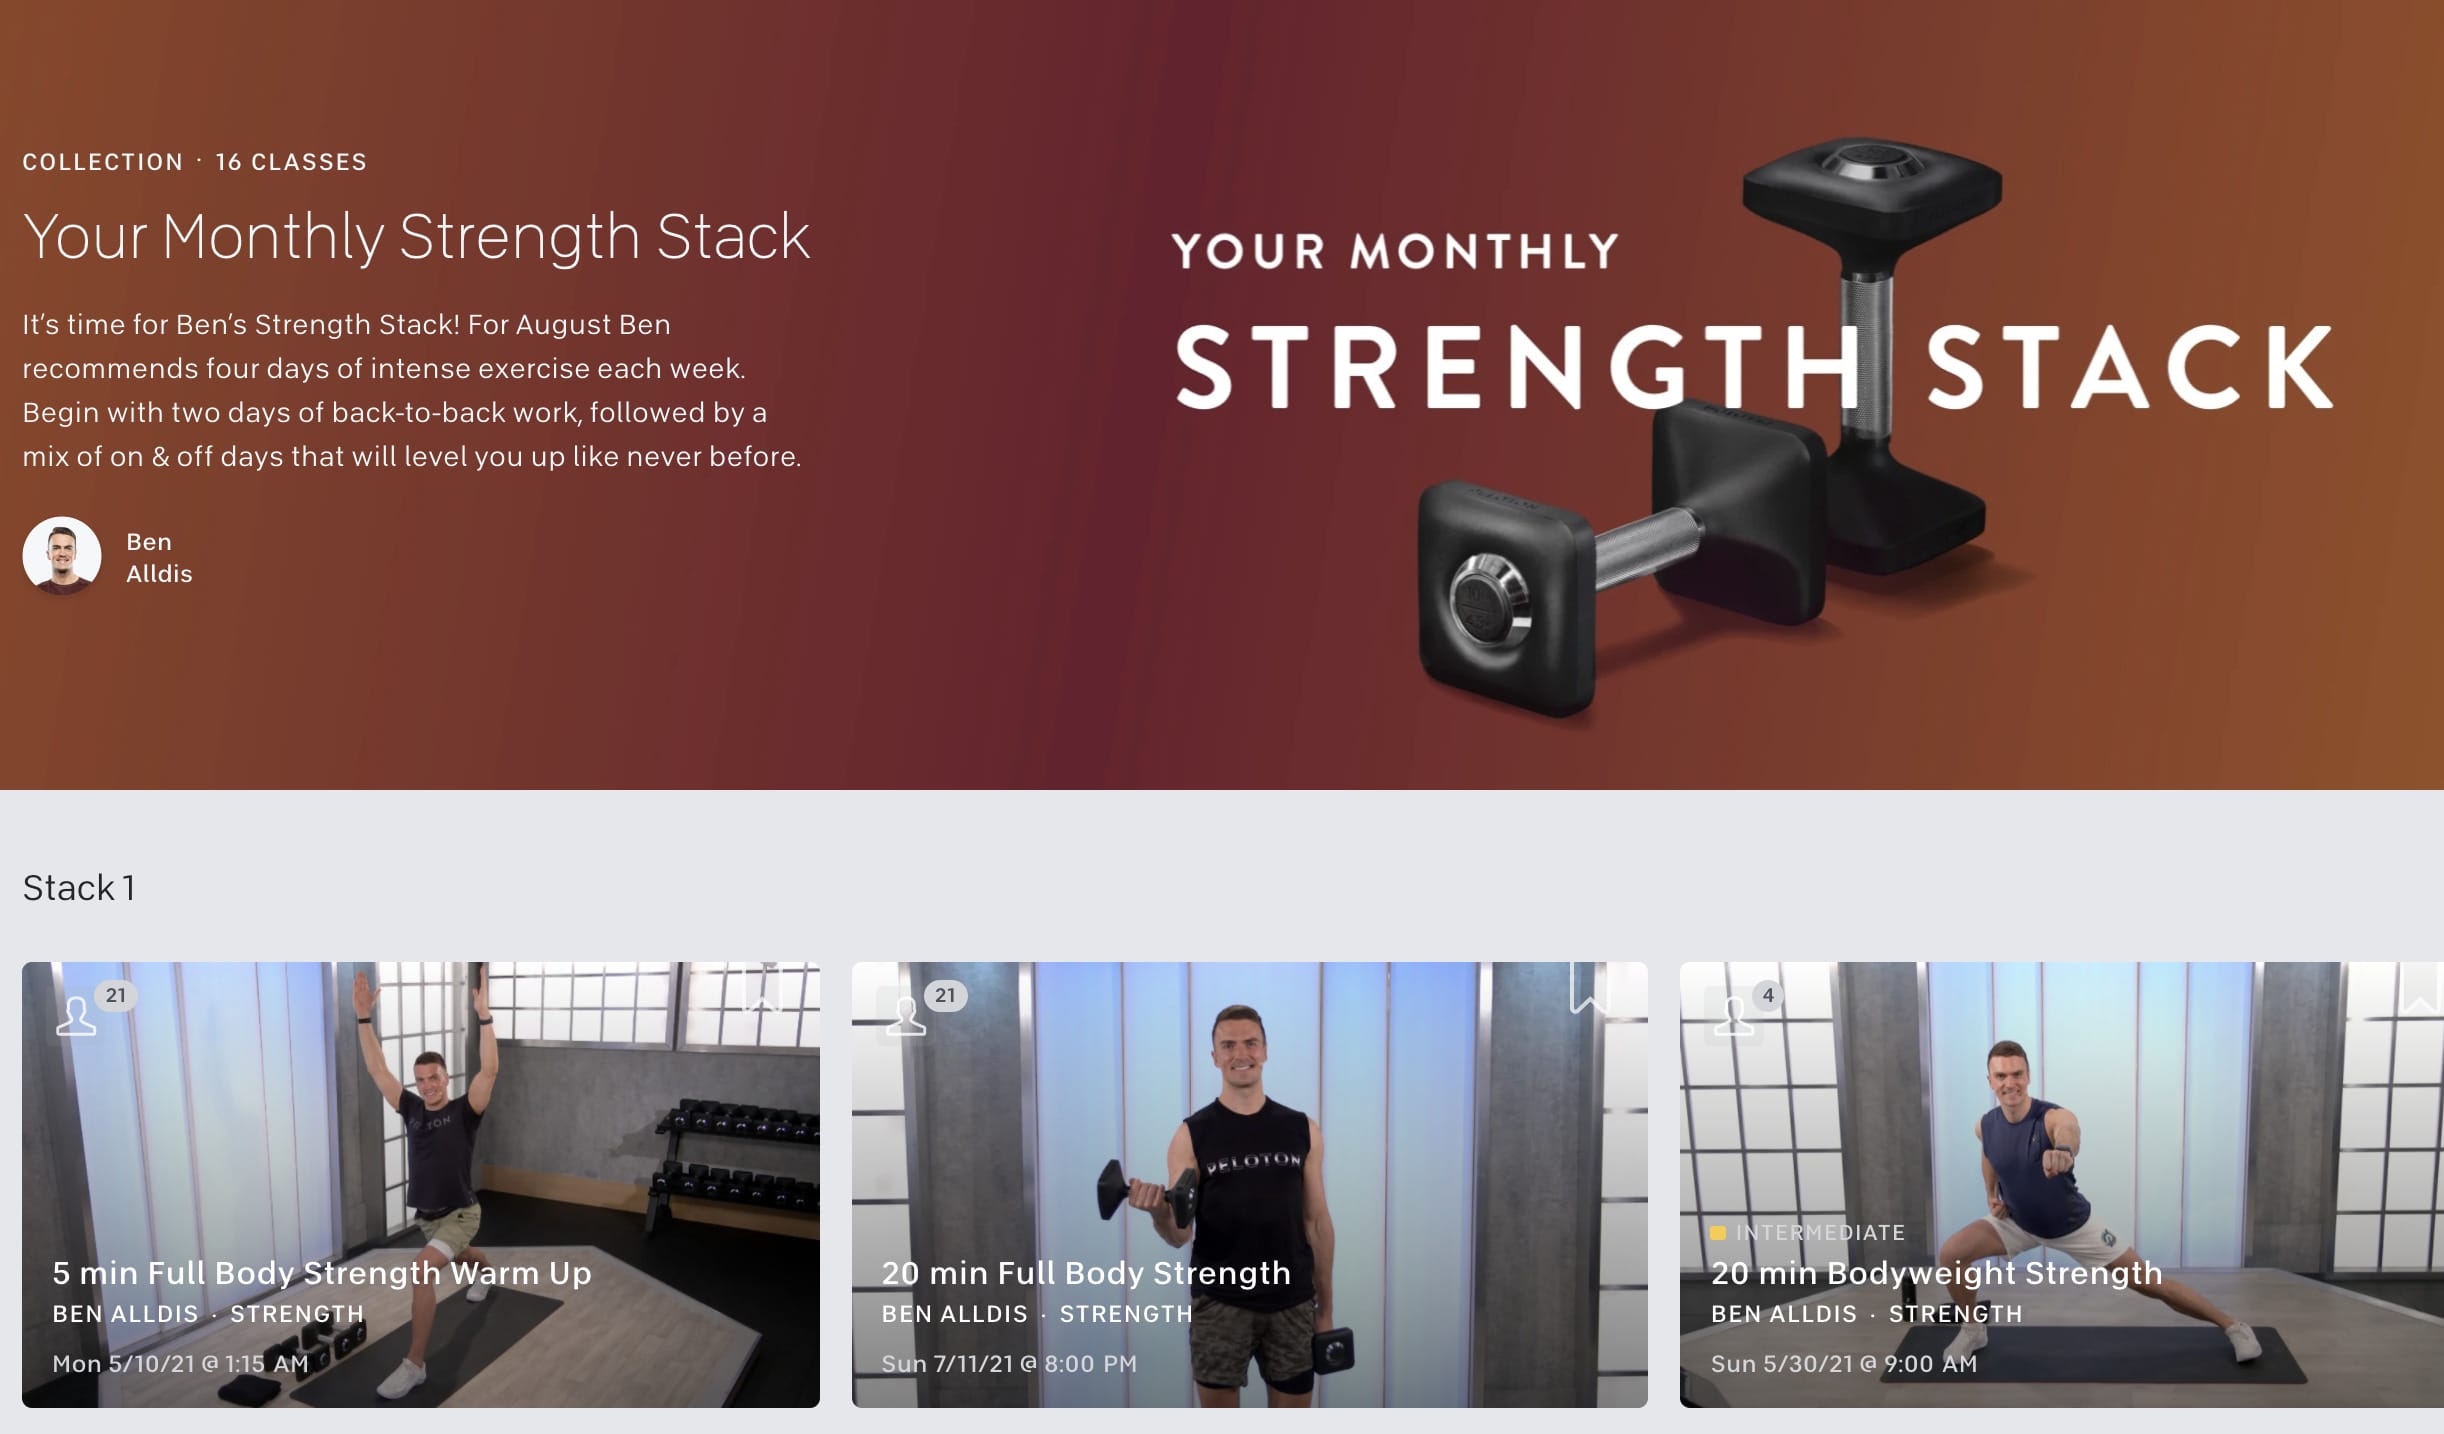 Image of the August strength stack collection with Ben Alldis from Peloton's website.